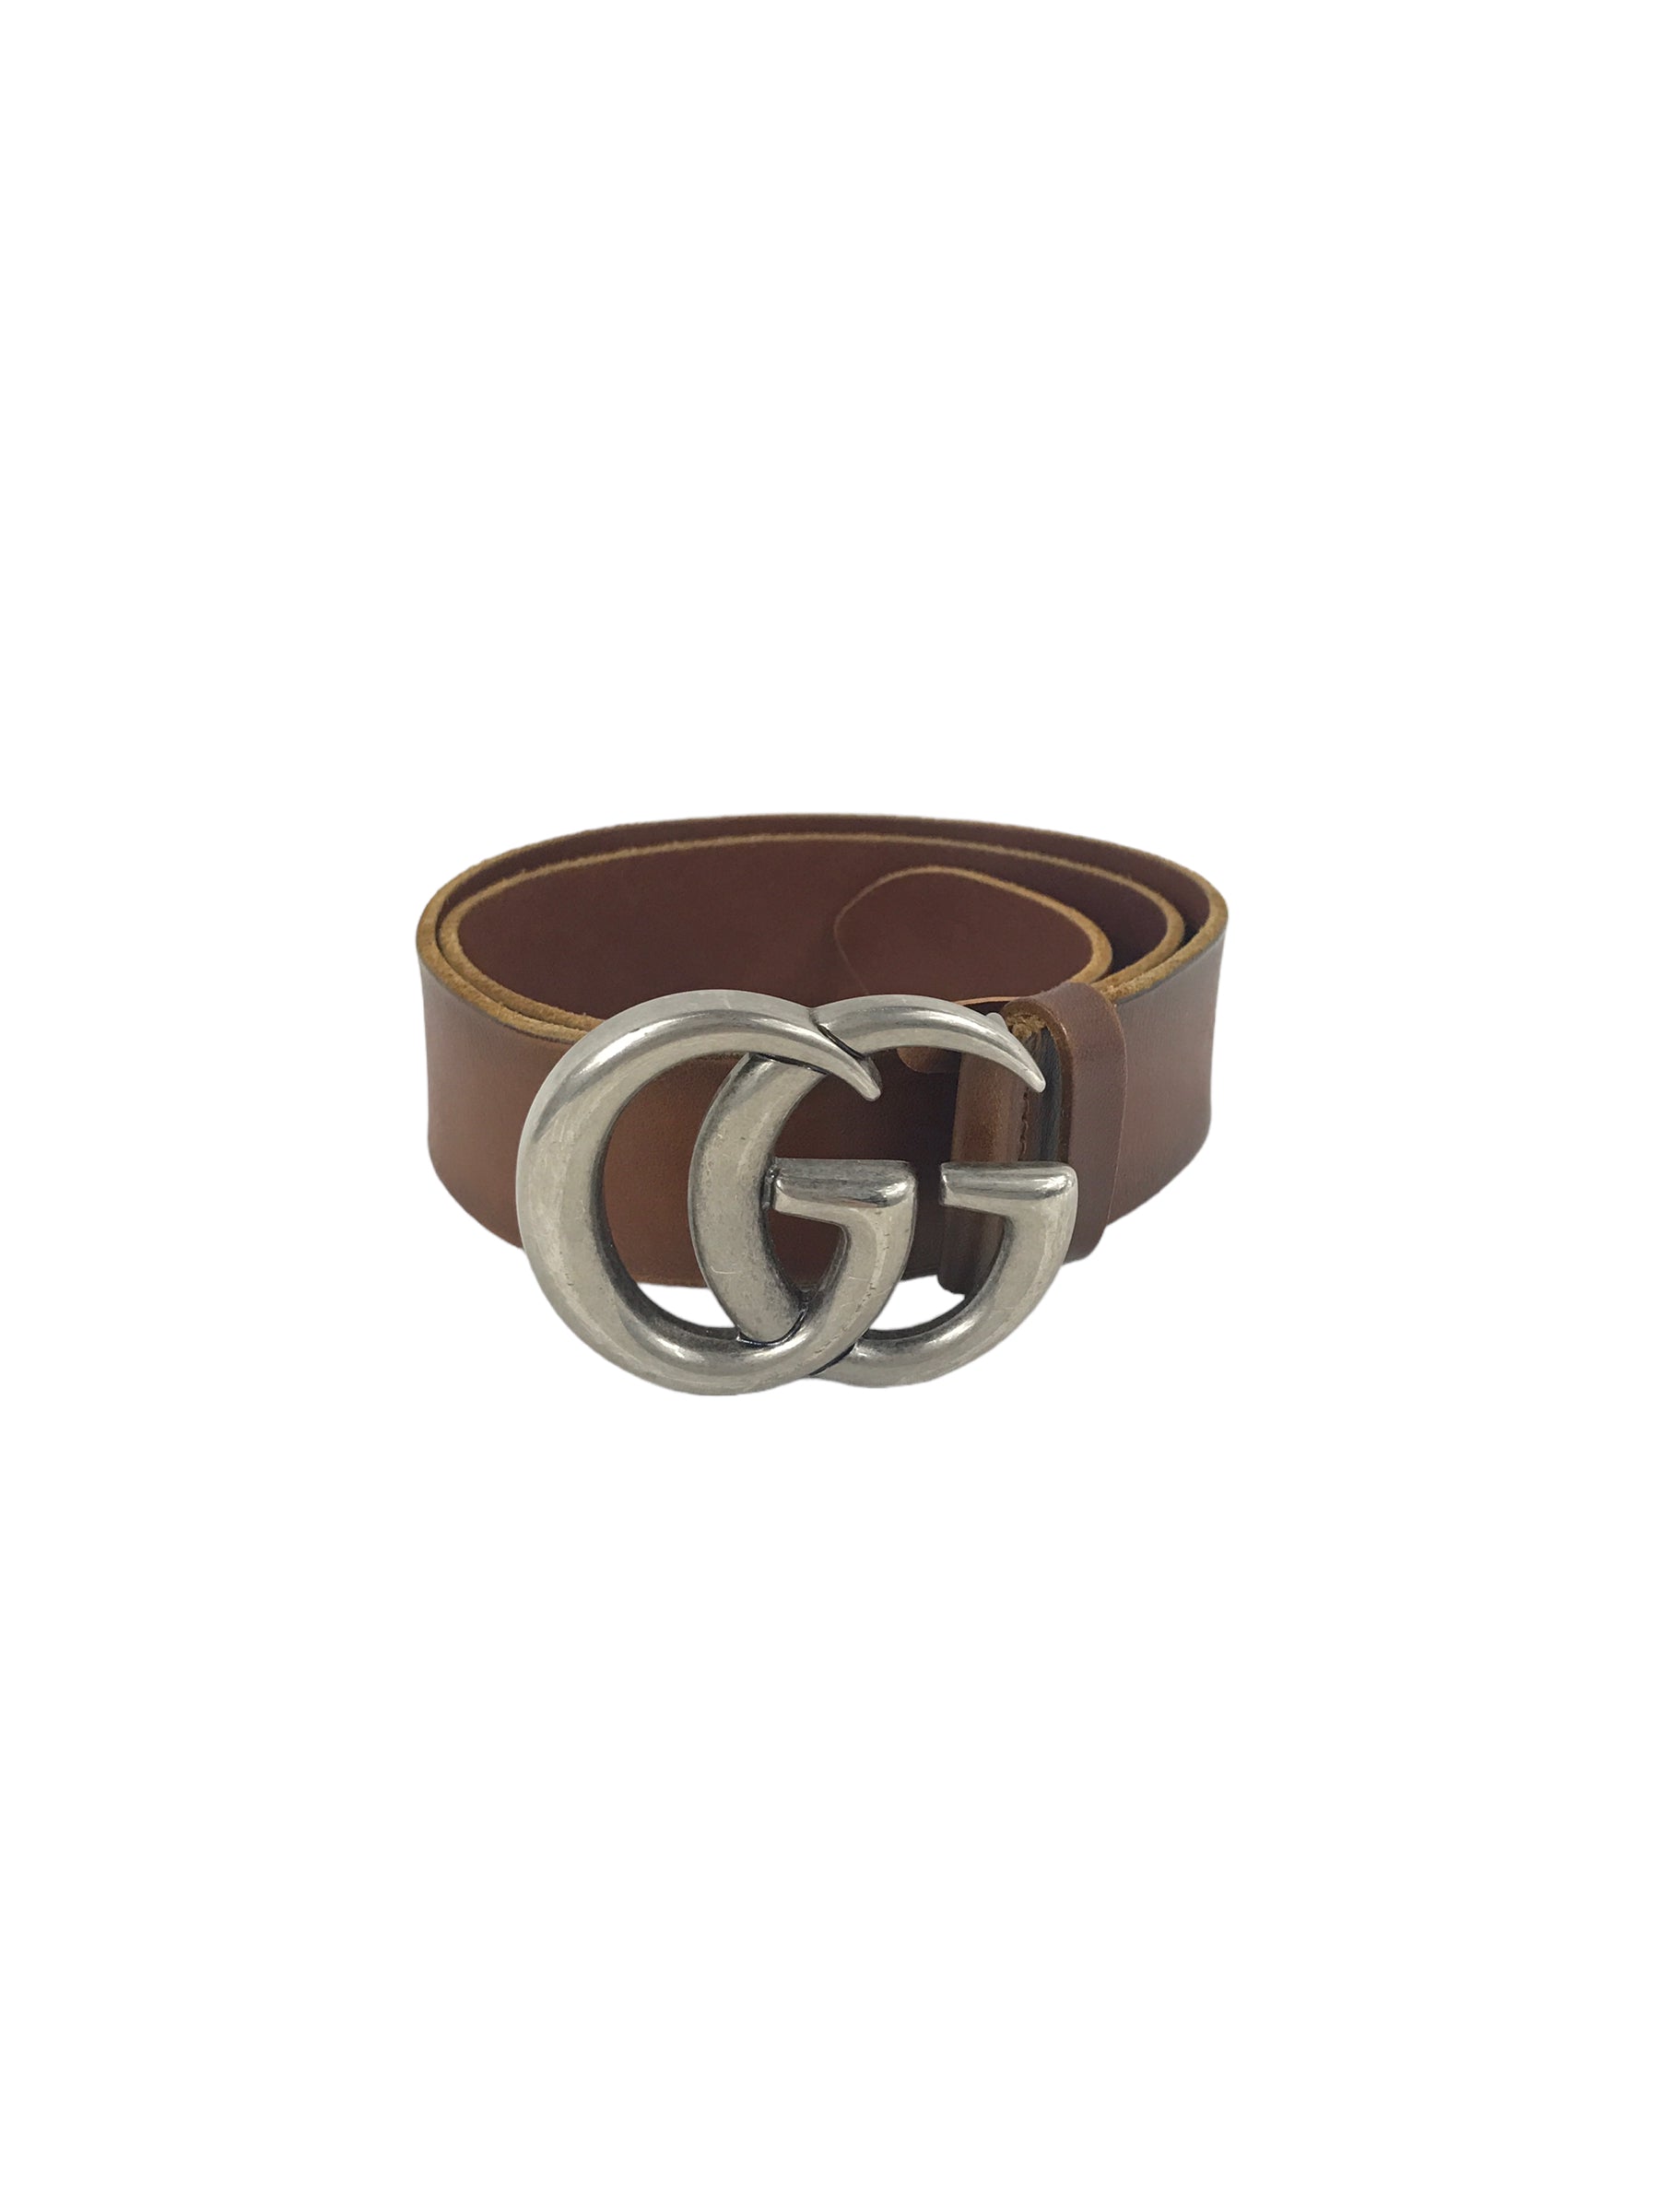 GG Brown Aged Calfskin Leather Marmont Belt